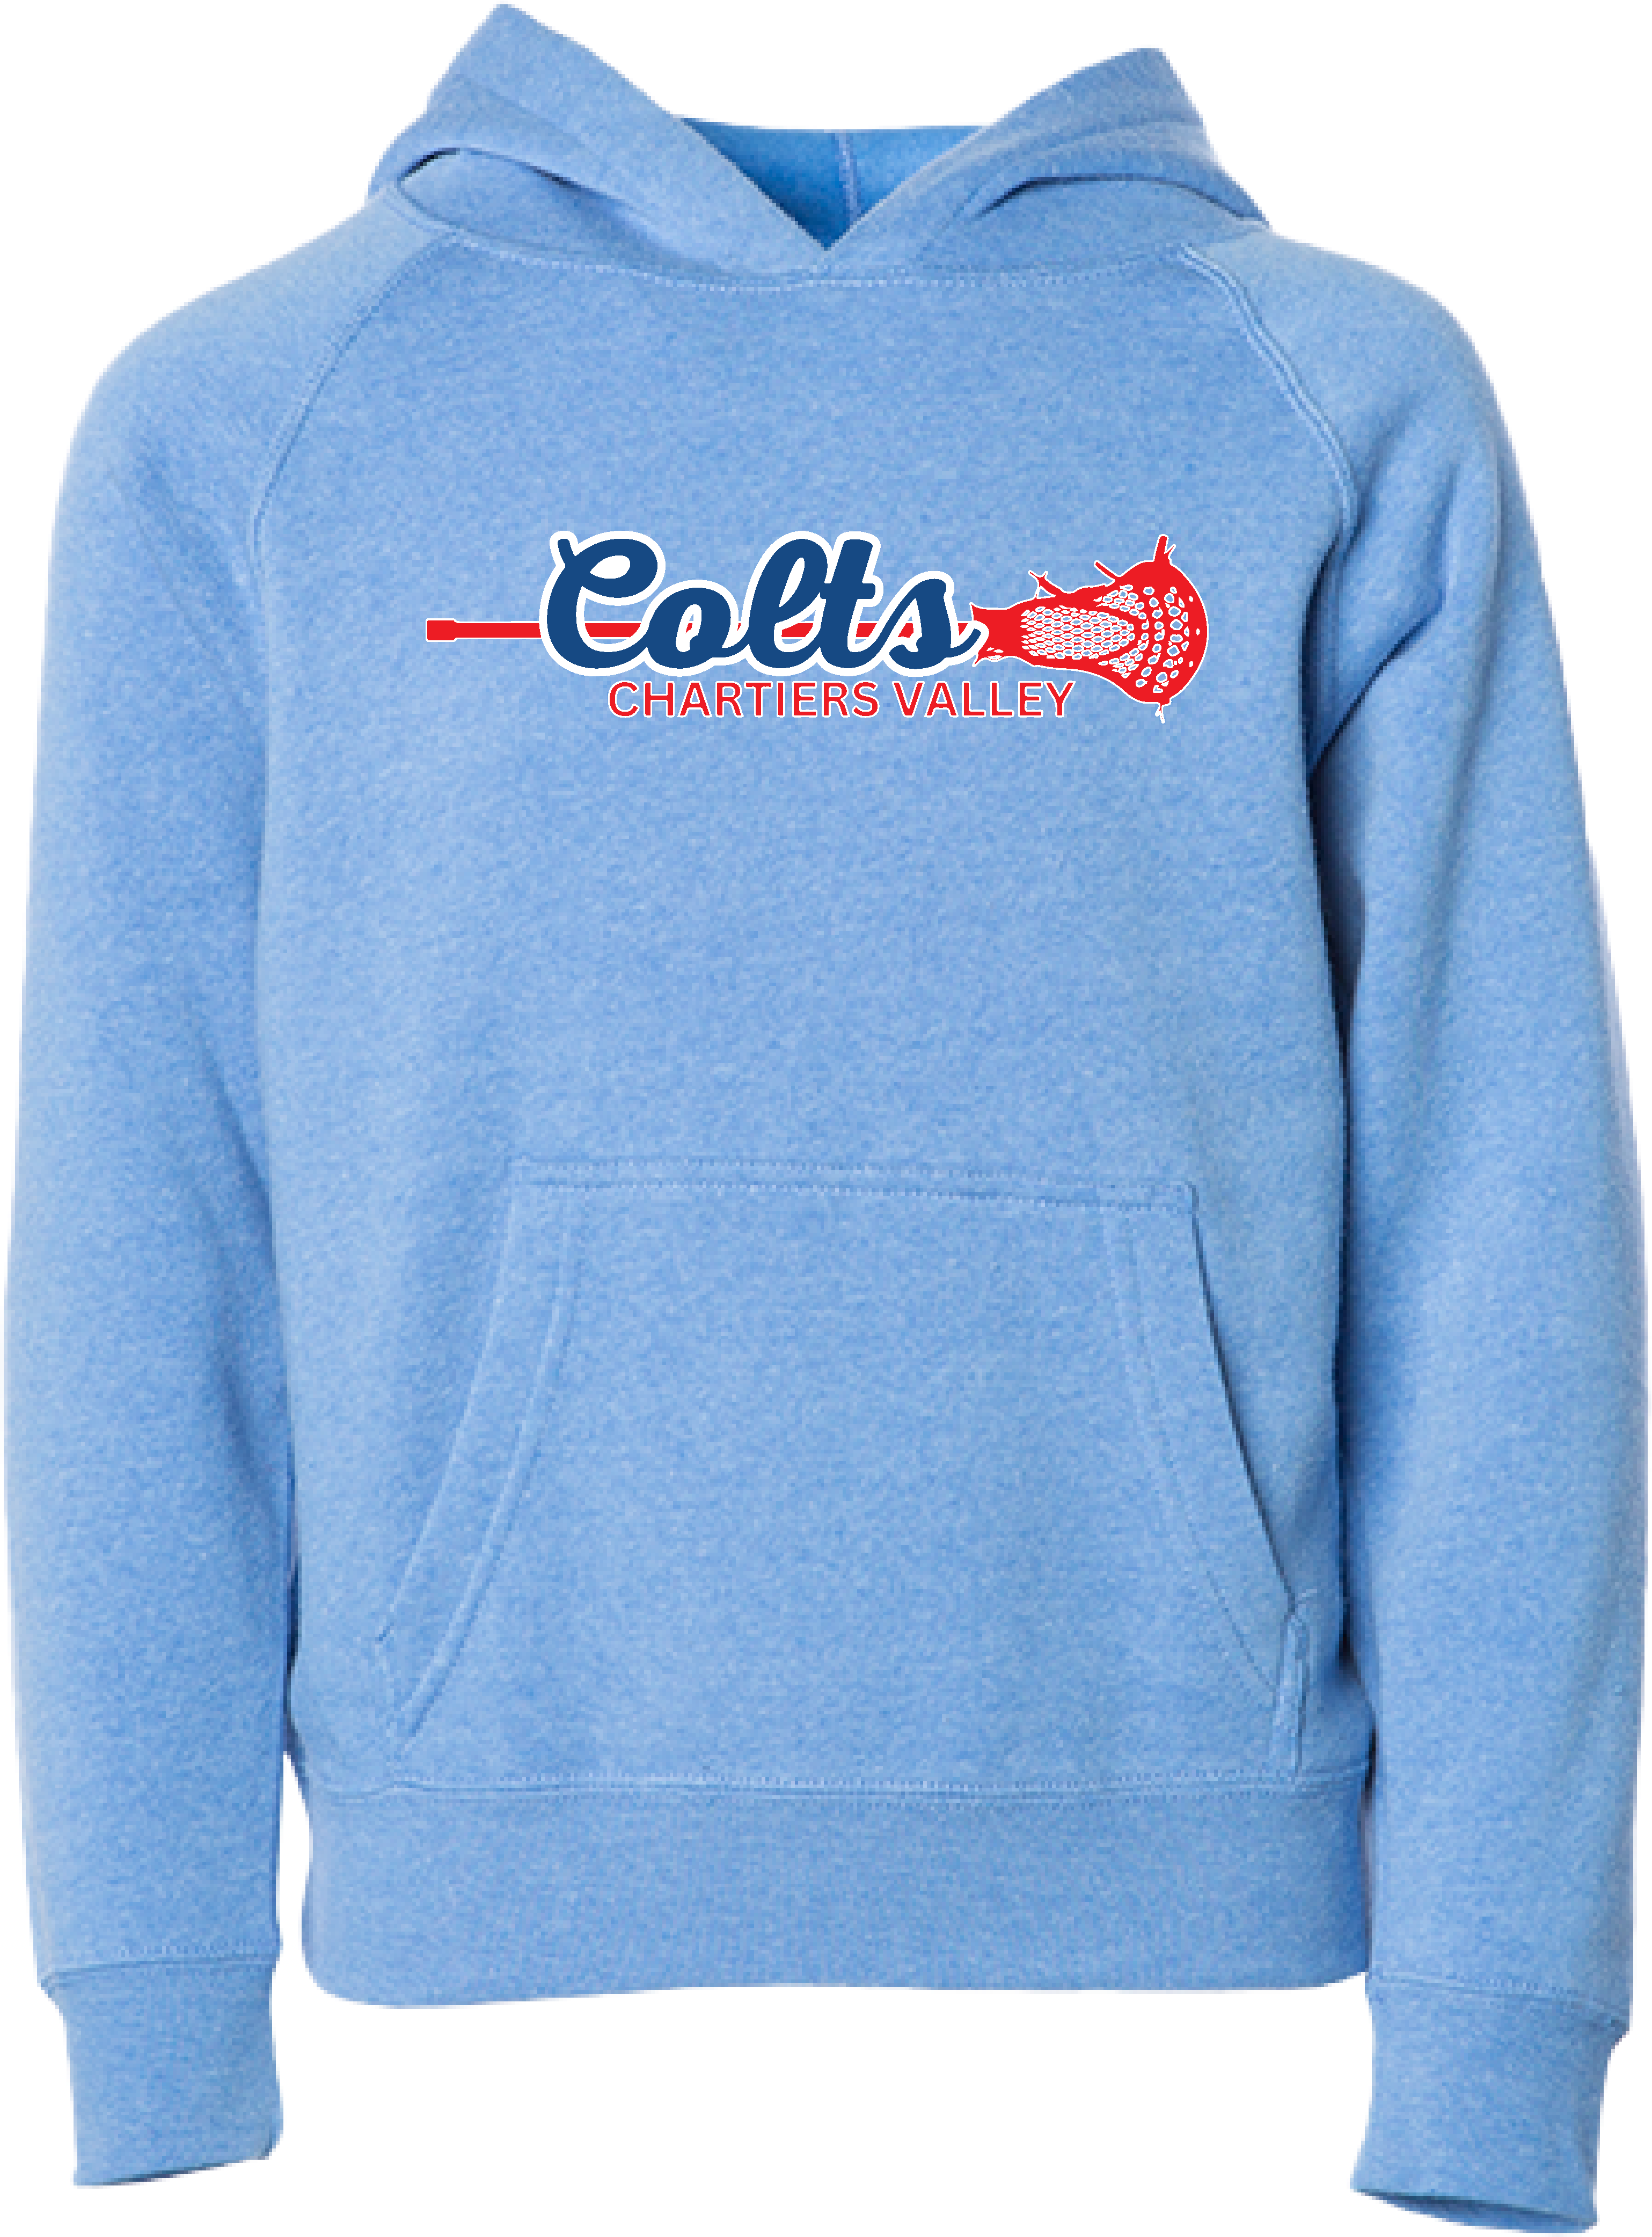 CV LAX YOUTH FACEOFF HOODIE